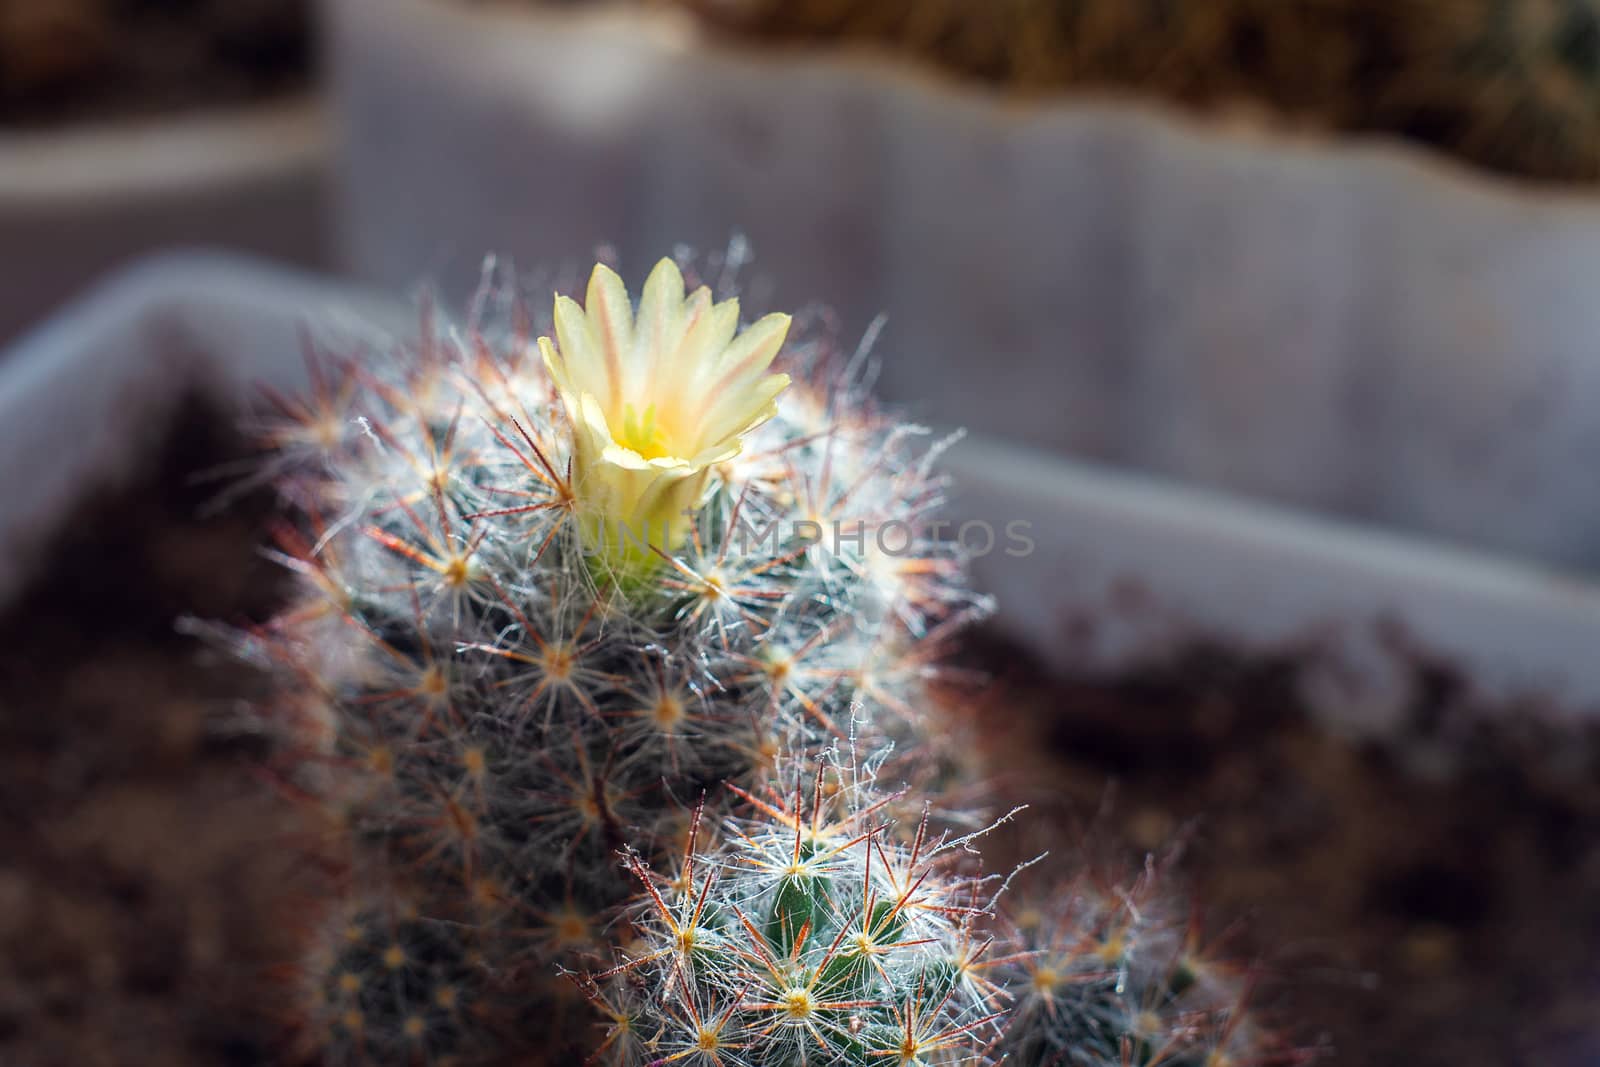 Blooming small home cactus in a flower pot. Yellow flower near a thorny cactus on the windowsill